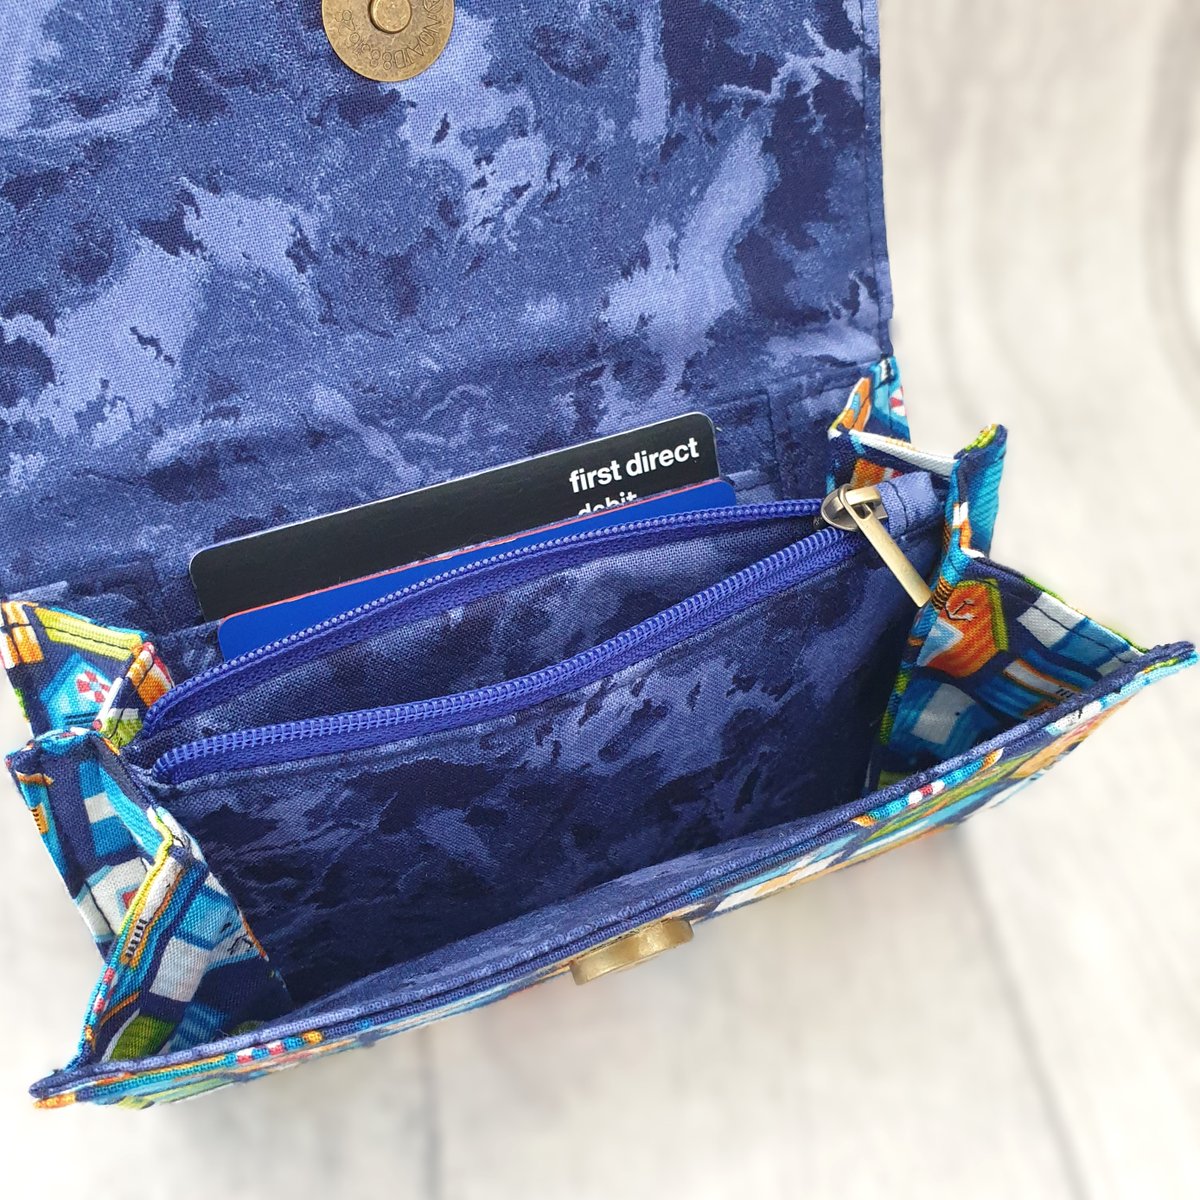 #MHHSBD 𝗧𝗵𝗲 𝗽𝗲𝗿𝗳𝗲𝗰𝘁 𝗽𝘂𝗿𝘀𝗲 𝗳𝗼𝗿 𝘀𝘂𝗺𝗺𝗲𝗿🌞 Get that beach vibe with this purse that's compact but with plenty of room inside. It's made from 100% cotton in a cool beach hut fabric with a coordinating lining just like the sea. Link in comments🌊